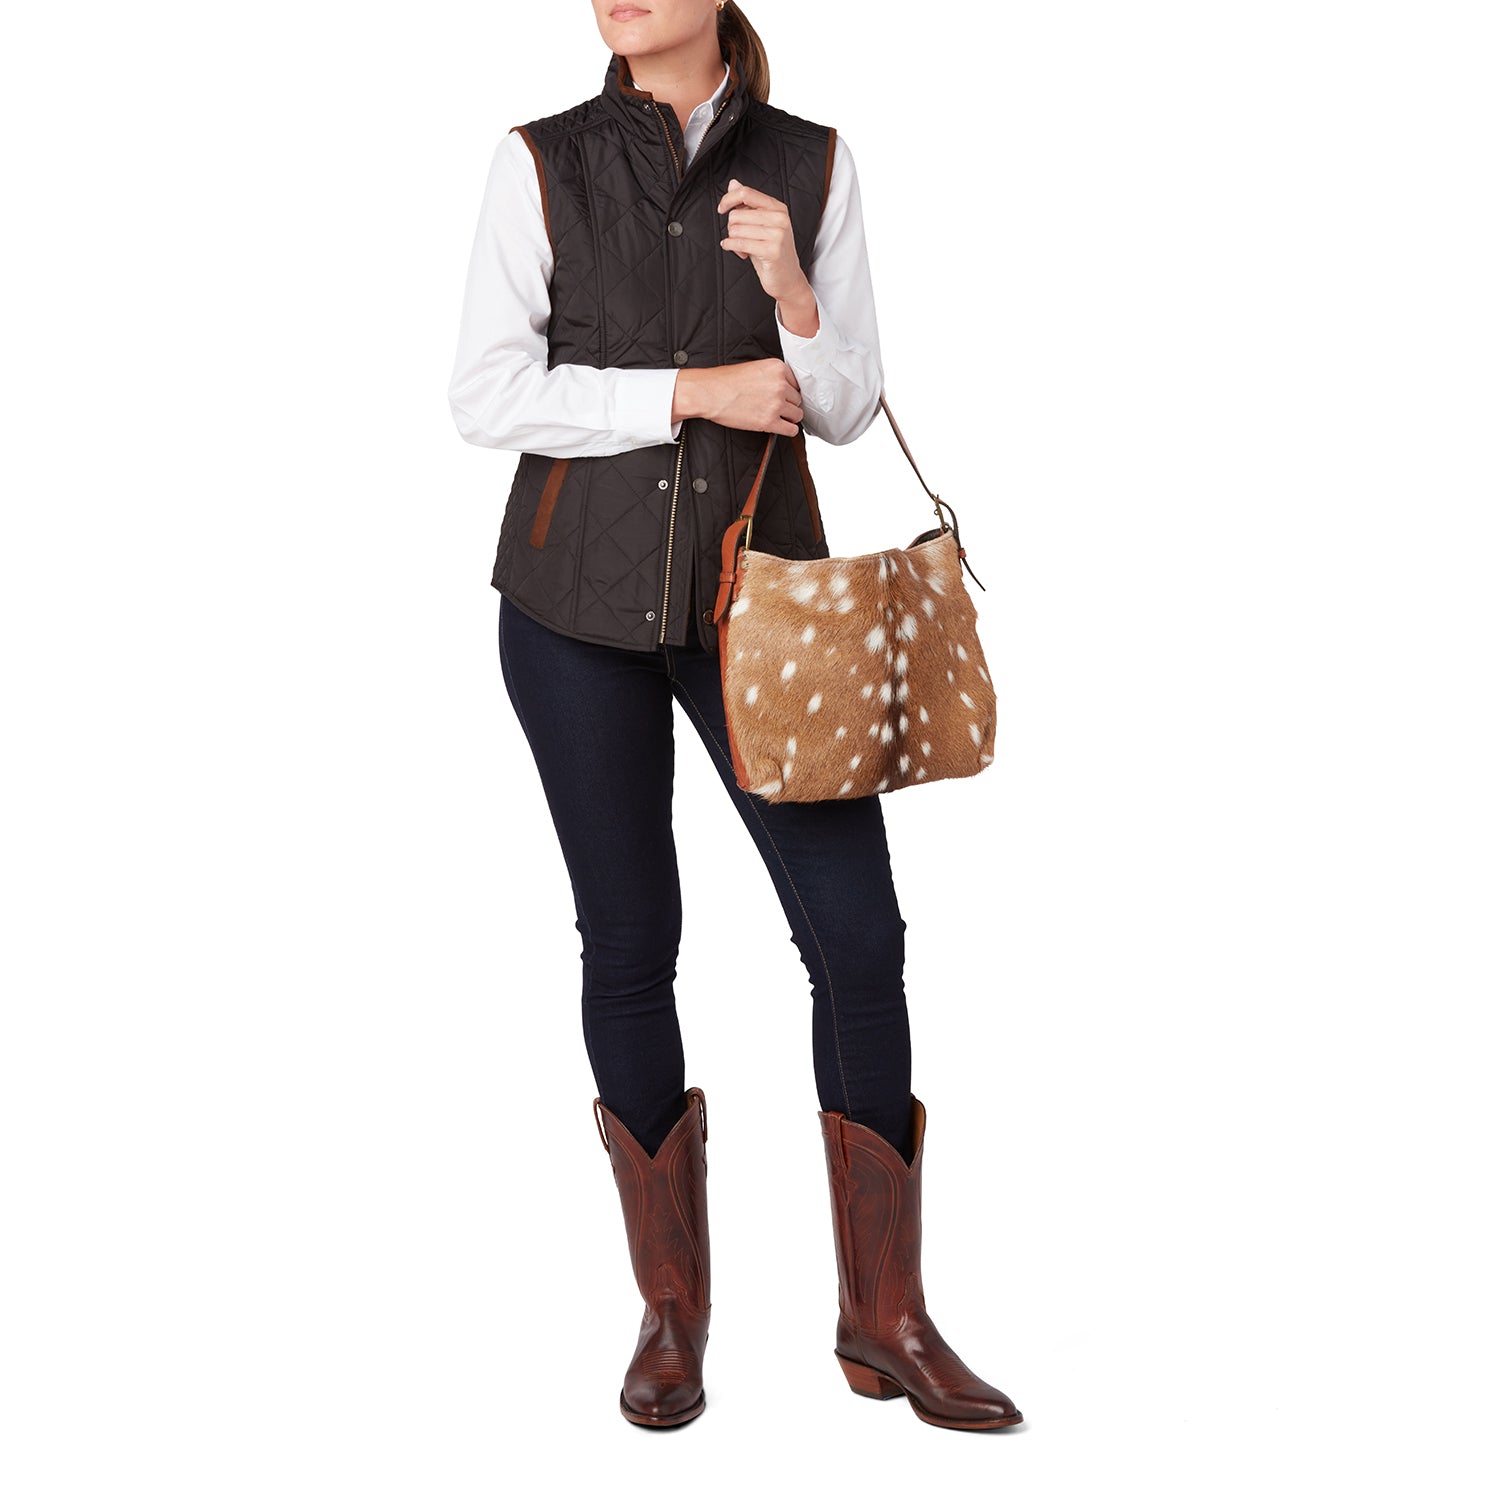 Lucchese | Axis Fringe Flap Crossbody :: Axis Brown